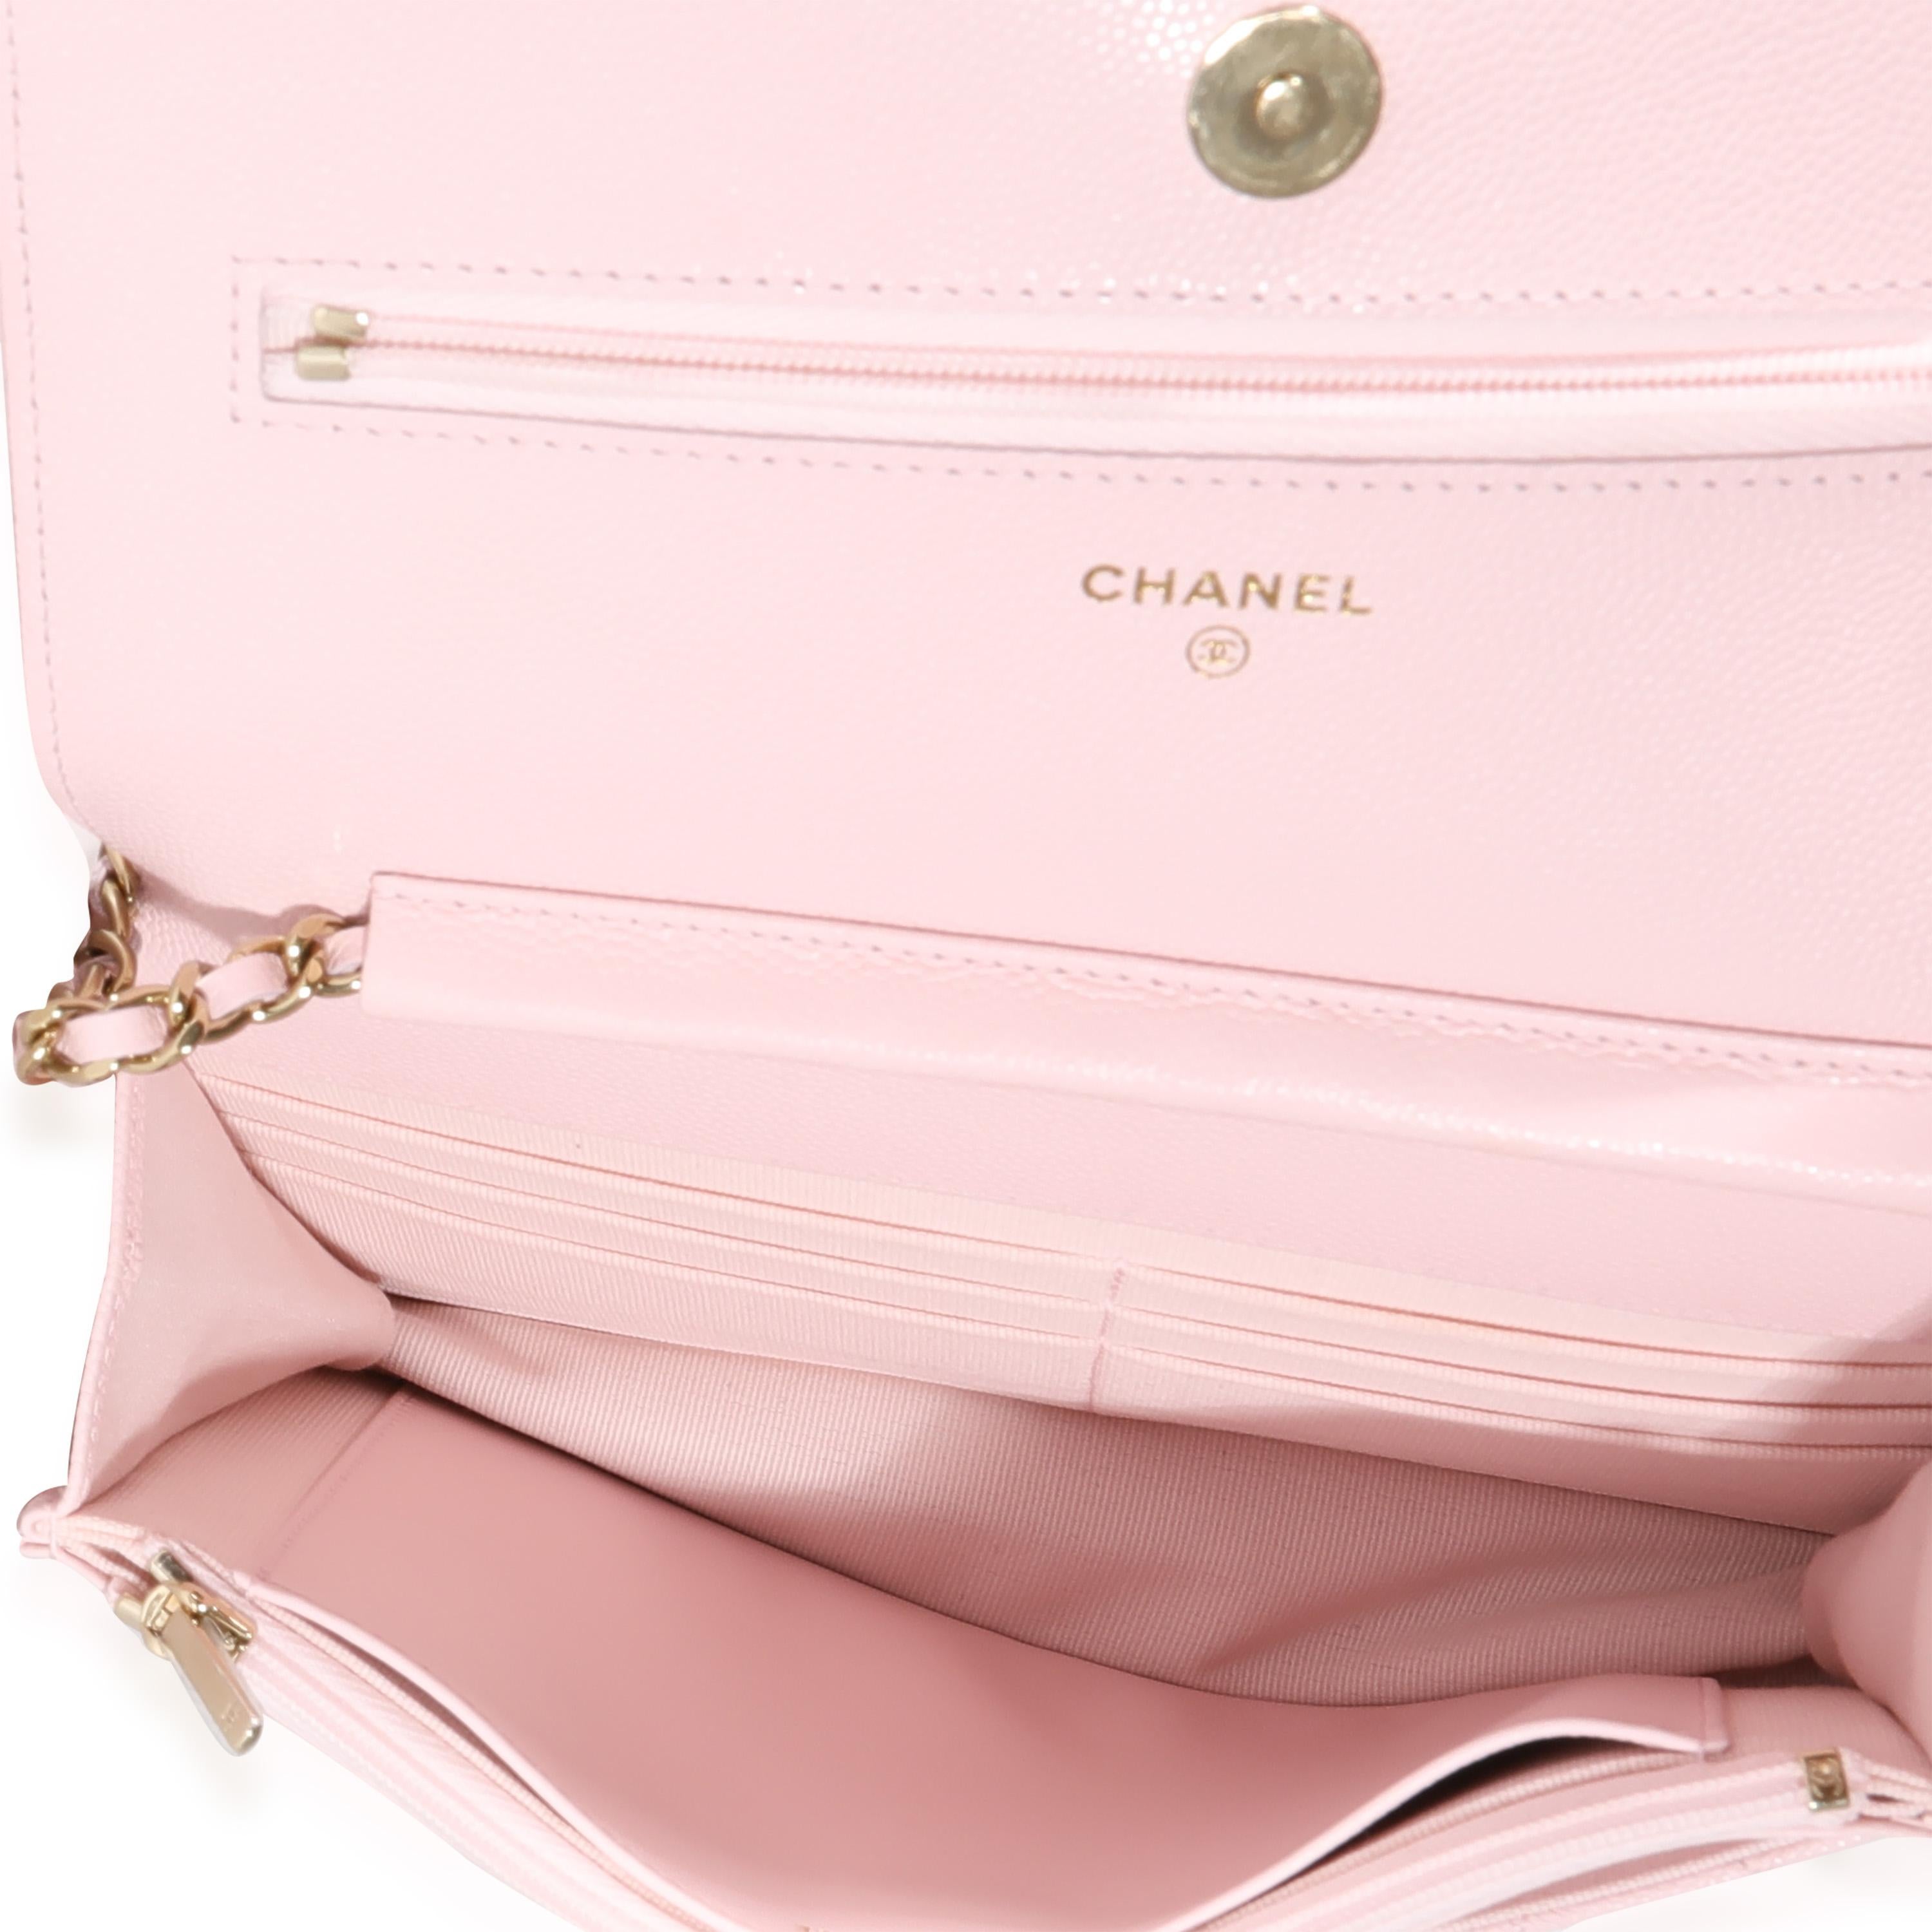 Listing Title: Chanel Pale Pink Quilted Caviar Wallet on Chain
SKU: 122038
Condition: Pre-owned 
Handbag Condition: Excellent
Condition Comments: Excellent Condition. Some plastic at hardware. Scuffing at corners. Scratching at hardware. Light marks